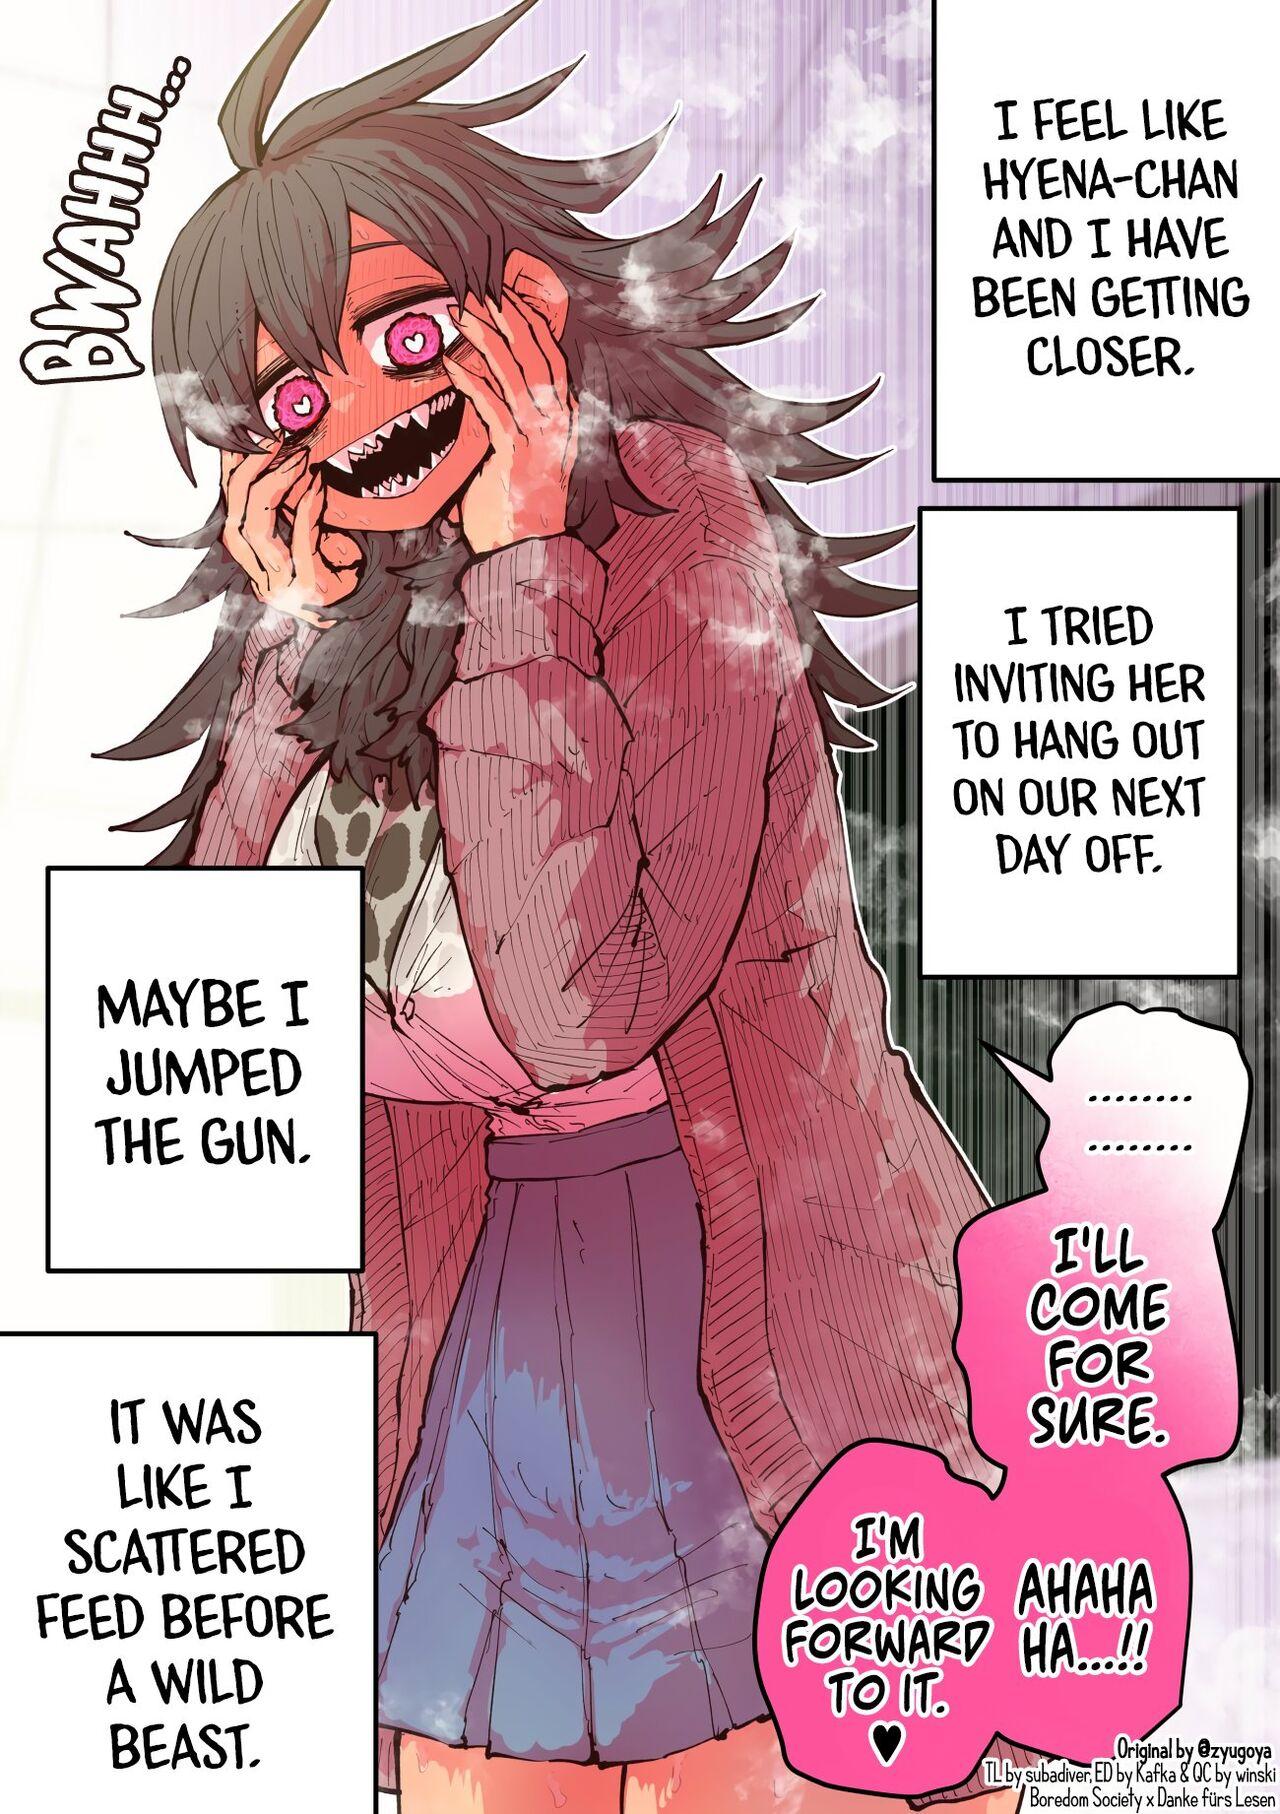 Cocksucking Being Targeted by Hyena-chan - Original Newbie - Page 7